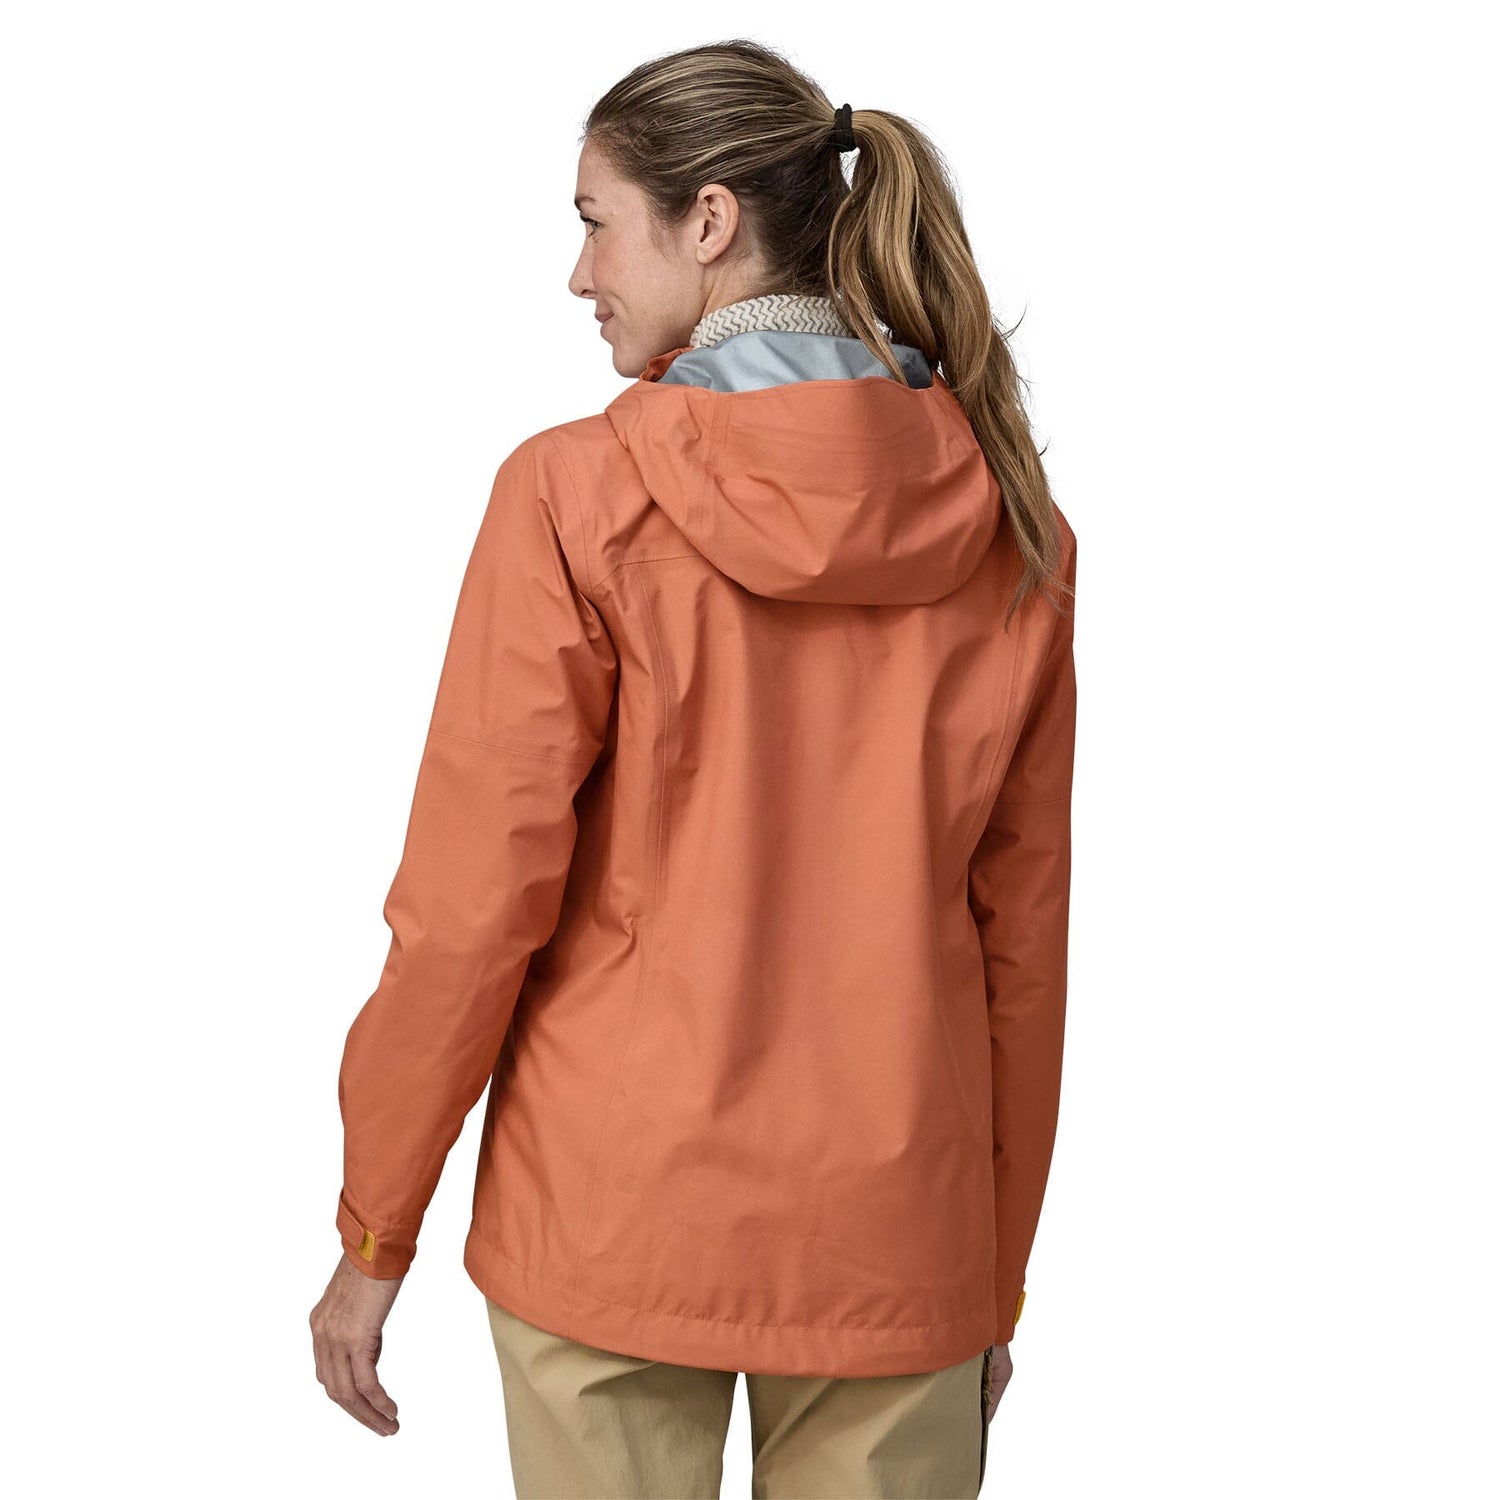 Patagonia W's Boulder Fork Rain Jacket - Recycled polyester Sienna Clay Jacket